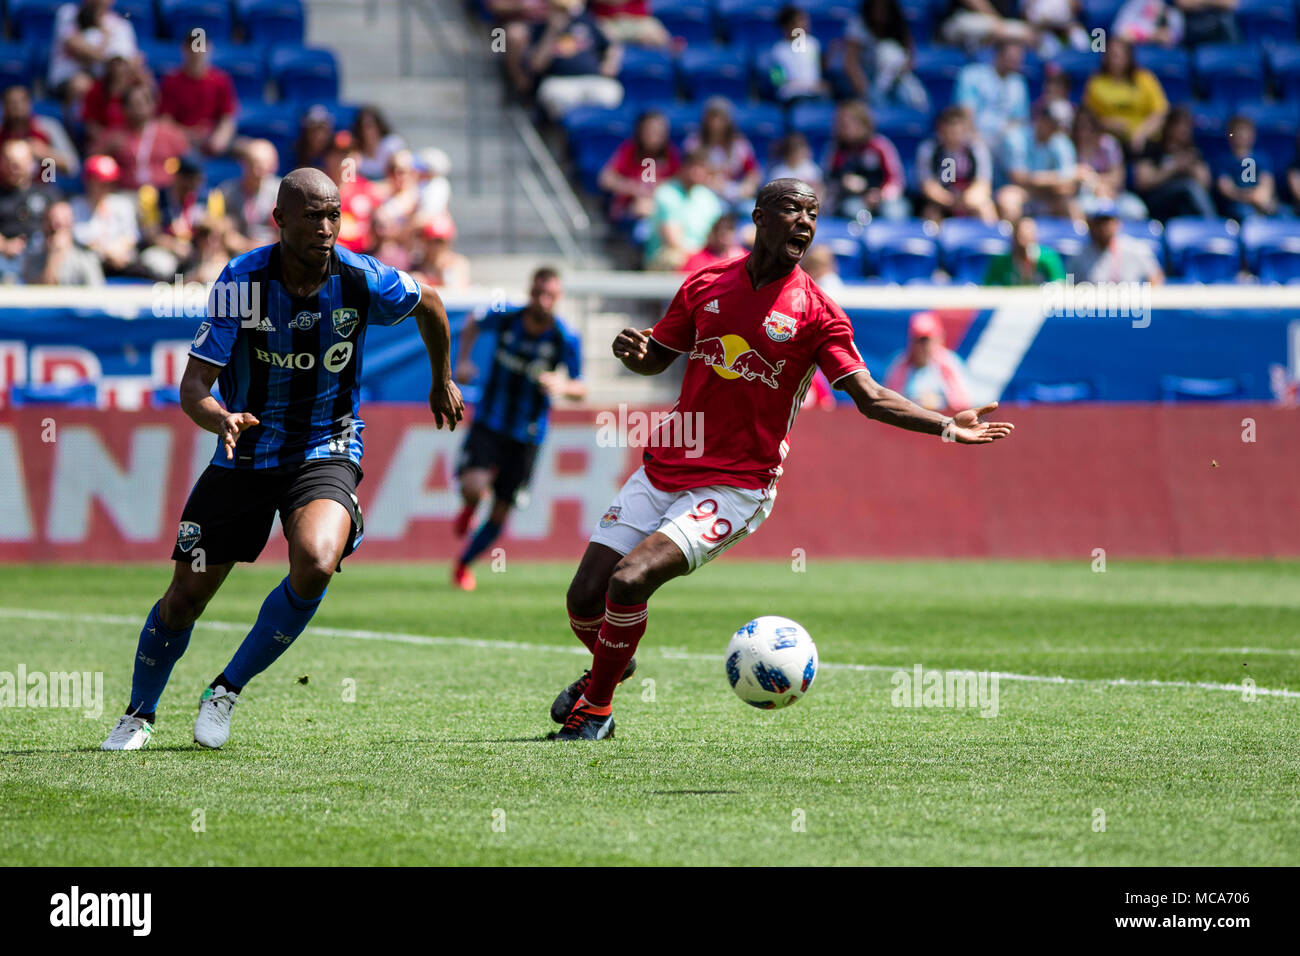 New Jersey, USA. 14th April, 2018. Bradley Wright-Phillips (99) and Rod Fanni (15) battle for the ball in the first half of the match. The Red Bulls defeated the Impact 3-1. Stock Photo